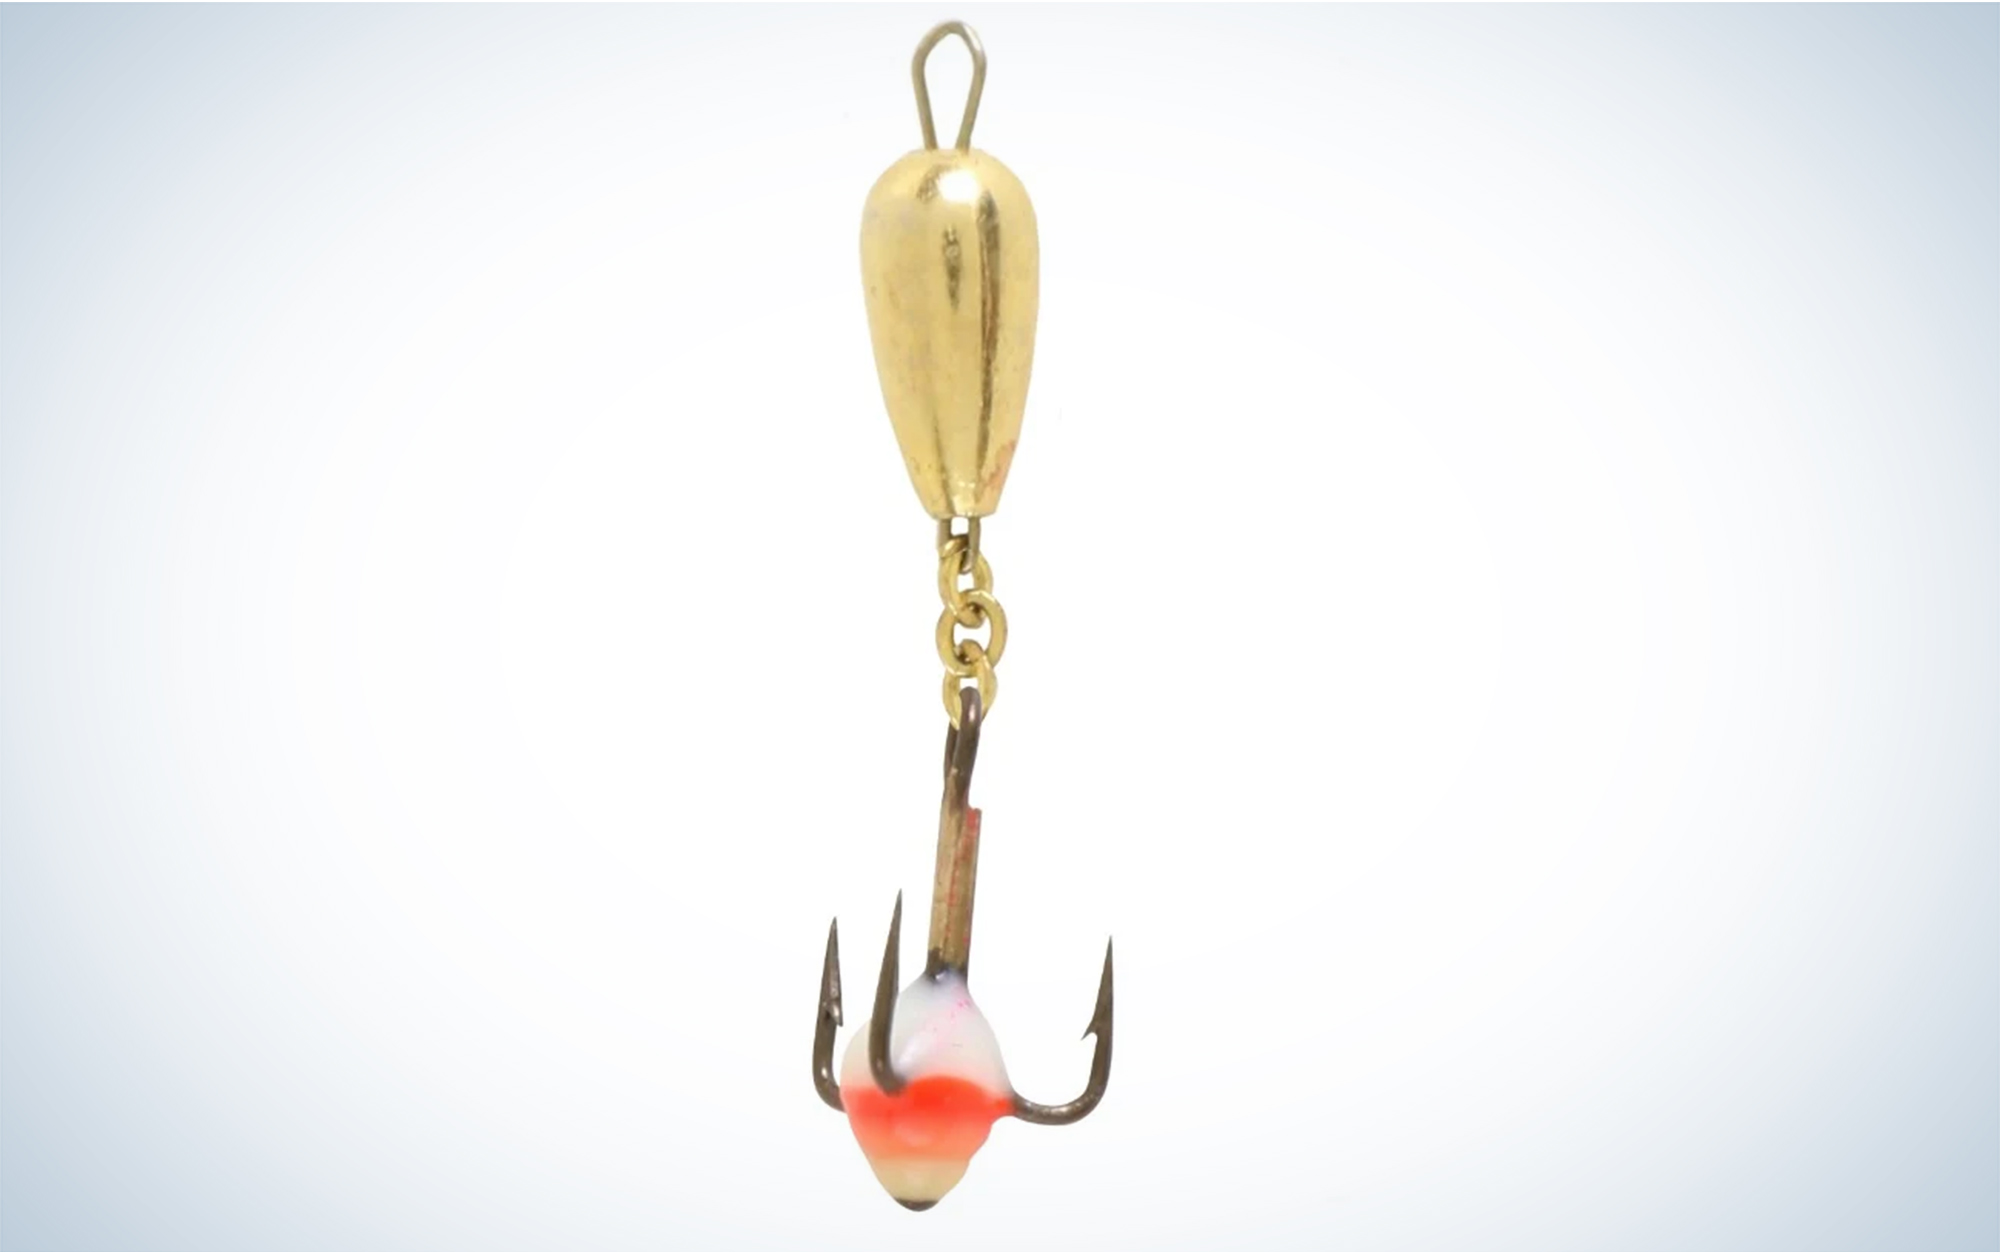 The CLAM Dropper Spoon is one of the best ice fishing lures for perch.